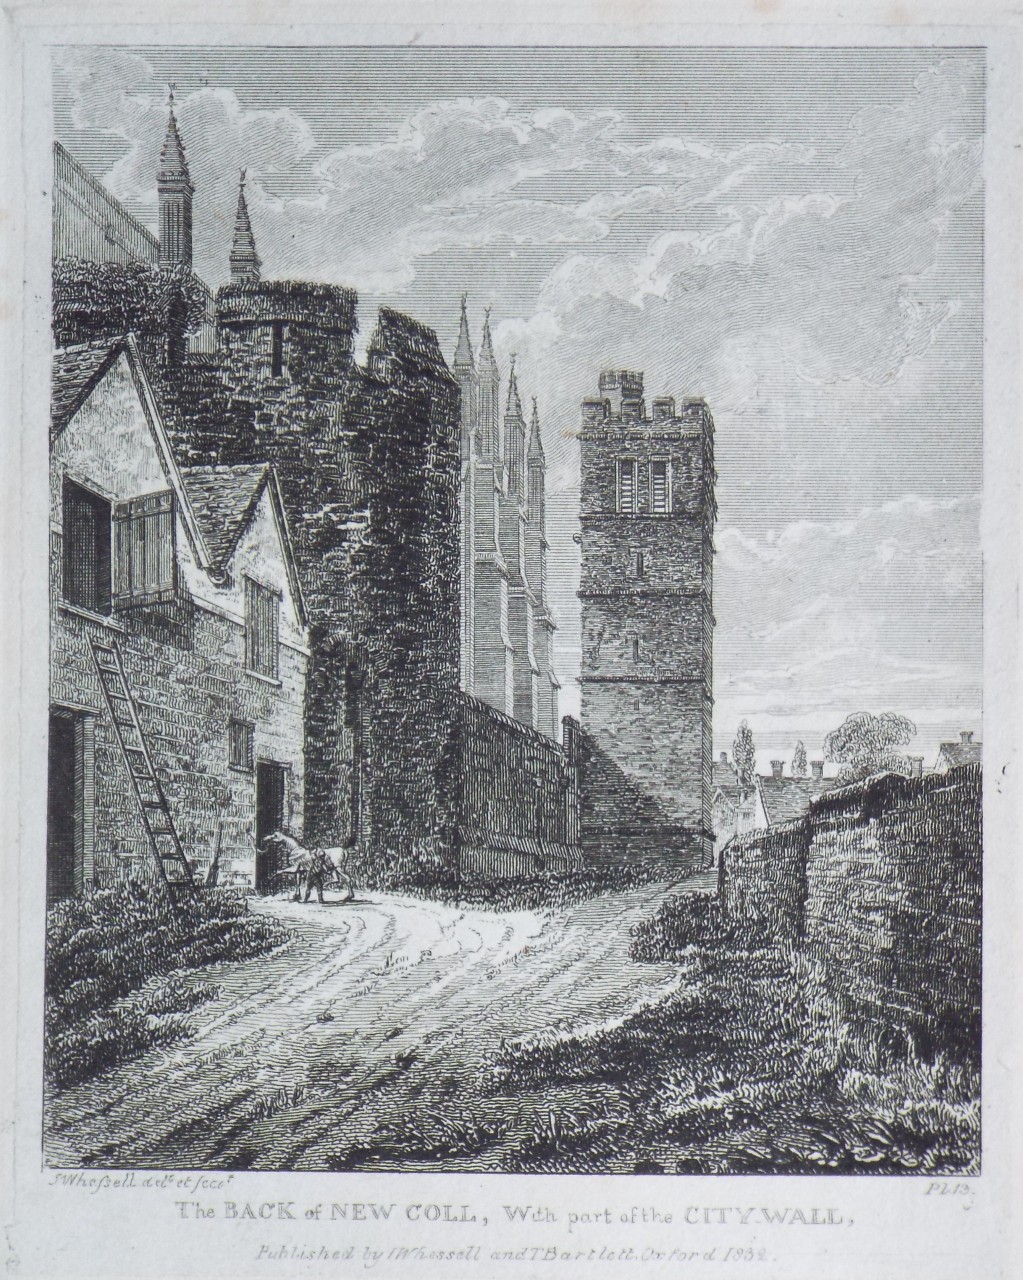 Print - The Back of New Coll, With part of the City Wall. - Whessell